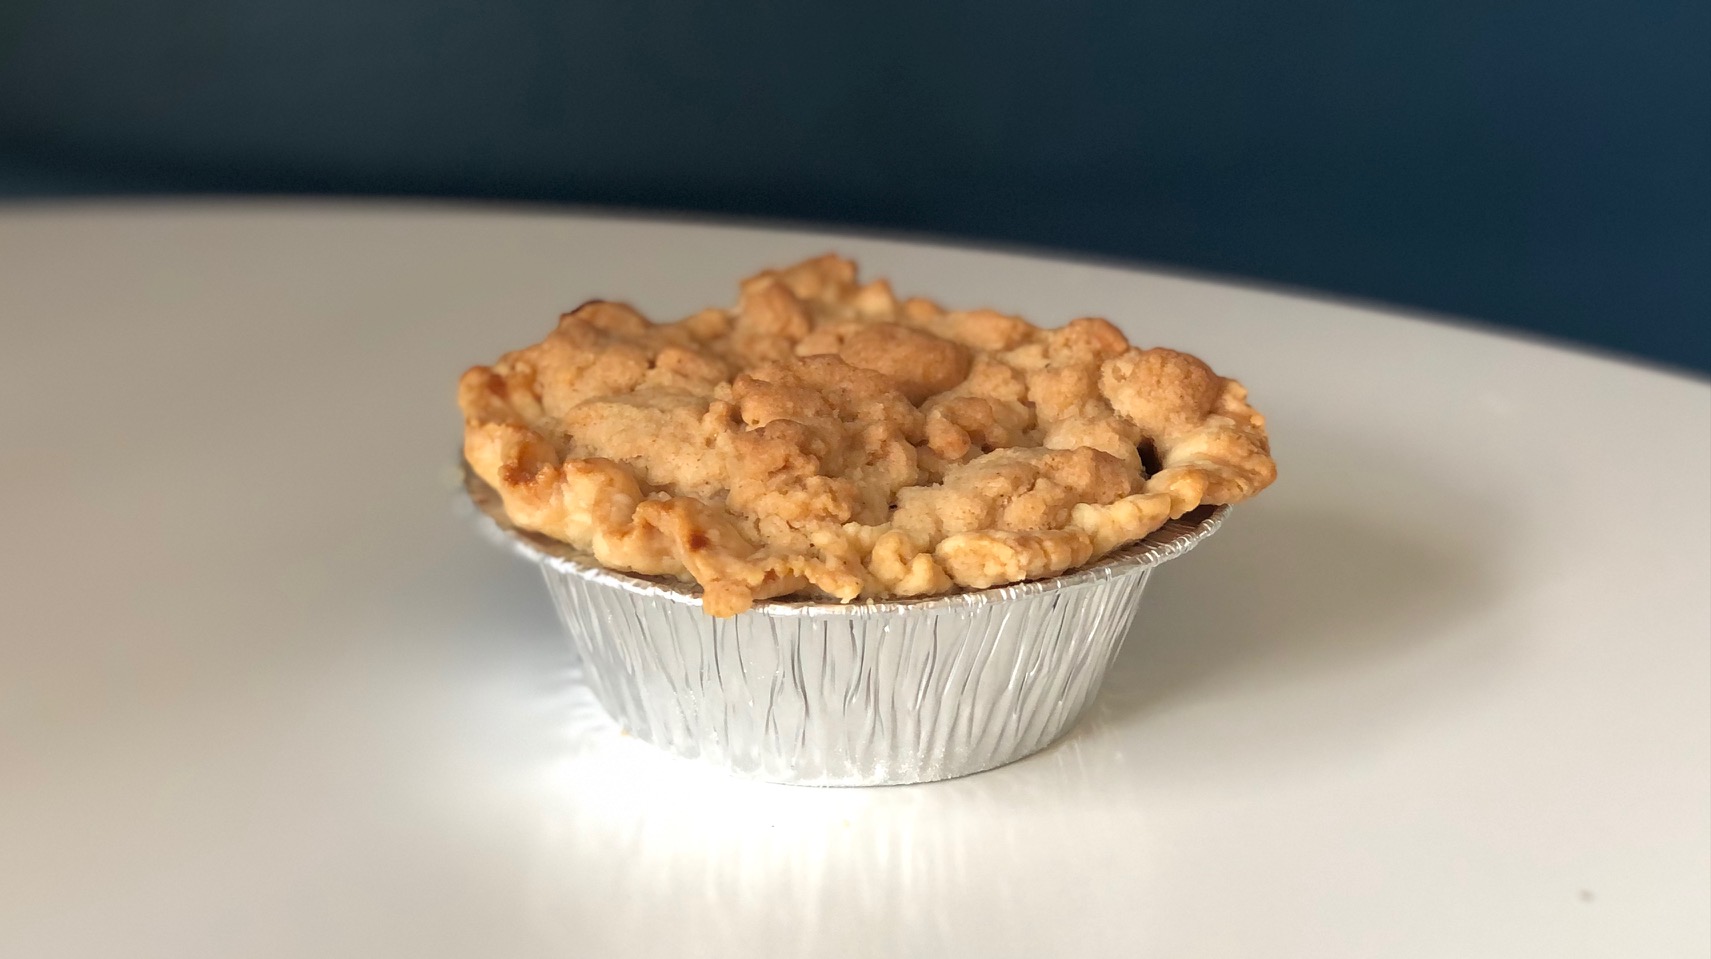 On a white table, there is a mini apple pie with a crumble topping in a tin foil pan. Photo by Alyssa Buckley.